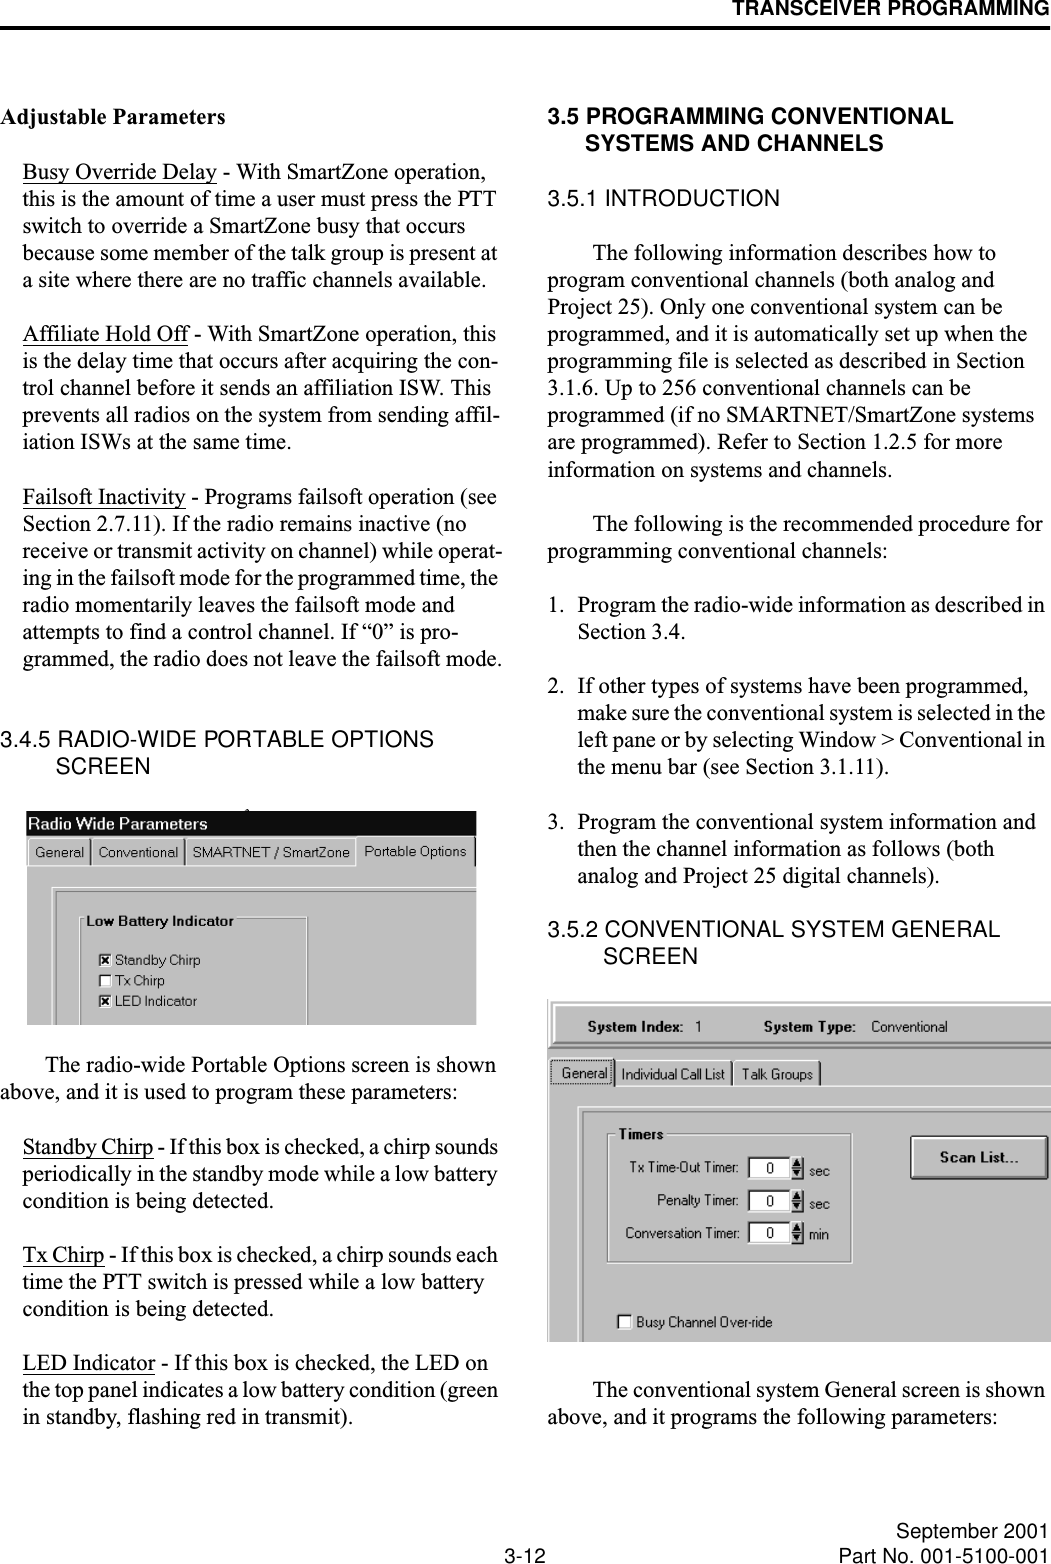 TRANSCEIVER PROGRAMMING3-12 September 2001Part No. 001-5100-001Adjustable ParametersBusy Override Delay - With SmartZone operation, this is the amount of time a user must press the PTT switch to override a SmartZone busy that occurs because some member of the talk group is present at a site where there are no traffic channels available.Affiliate Hold Off - With SmartZone operation, this is the delay time that occurs after acquiring the con-trol channel before it sends an affiliation ISW. This prevents all radios on the system from sending affil-iation ISWs at the same time.Failsoft Inactivity - Programs failsoft operation (see Section 2.7.11). If the radio remains inactive (no receive or transmit activity on channel) while operat-ing in the failsoft mode for the programmed time, the radio momentarily leaves the failsoft mode and attempts to find a control channel. If “0” is pro-grammed, the radio does not leave the failsoft mode.3.4.5 RADIO-WIDE PORTABLE OPTIONS SCREENThe radio-wide Portable Options screen is shown above, and it is used to program these parameters:Standby Chirp - If this box is checked, a chirp sounds periodically in the standby mode while a low battery condition is being detected.Tx Chirp - If this box is checked, a chirp sounds each time the PTT switch is pressed while a low battery condition is being detected.LED Indicator - If this box is checked, the LED on the top panel indicates a low battery condition (green in standby, flashing red in transmit).3.5 PROGRAMMING CONVENTIONAL SYSTEMS AND CHANNELS3.5.1 INTRODUCTIONThe following information describes how to program conventional channels (both analog and Project 25). Only one conventional system can be programmed, and it is automatically set up when the programming file is selected as described in Section 3.1.6. Up to 256 conventional channels can be programmed (if no SMARTNET/SmartZone systems are programmed). Refer to Section 1.2.5 for more information on systems and channels.The following is the recommended procedure for programming conventional channels:1. Program the radio-wide information as described in Section 3.4. 2. If other types of systems have been programmed, make sure the conventional system is selected in the left pane or by selecting Window &gt; Conventional in the menu bar (see Section 3.1.11).3. Program the conventional system information and then the channel information as follows (both analog and Project 25 digital channels). 3.5.2 CONVENTIONAL SYSTEM GENERAL SCREENThe conventional system General screen is shown above, and it programs the following parameters: